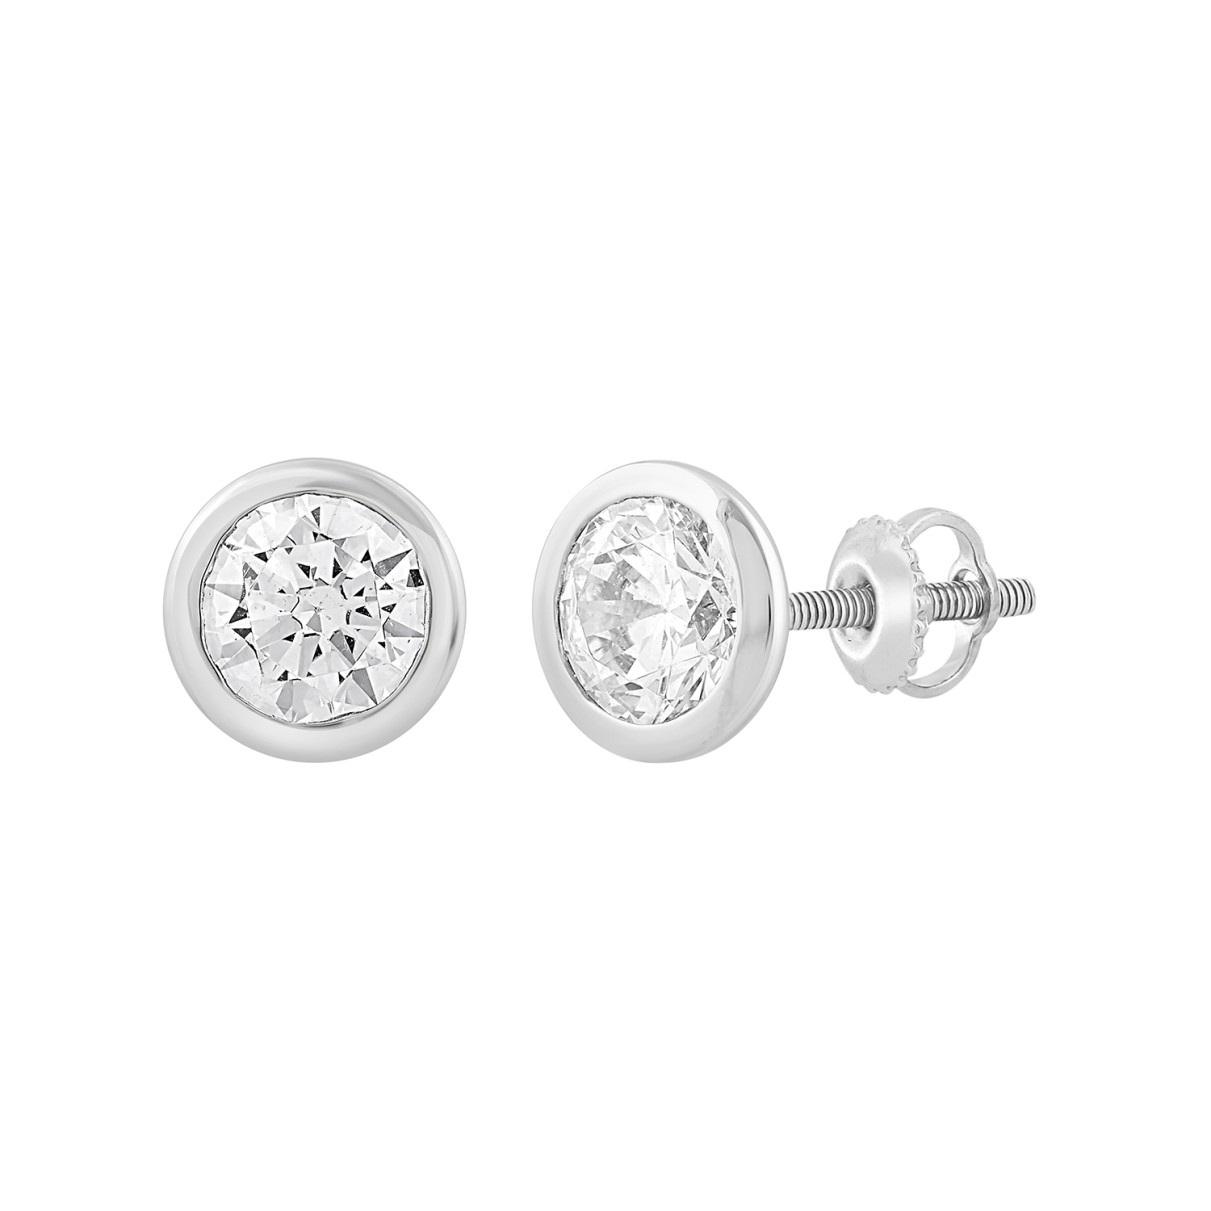 LADIES SOLITAIRE EARRINGS 2CT ROUND DIAMOND 14K ROSE GOLD